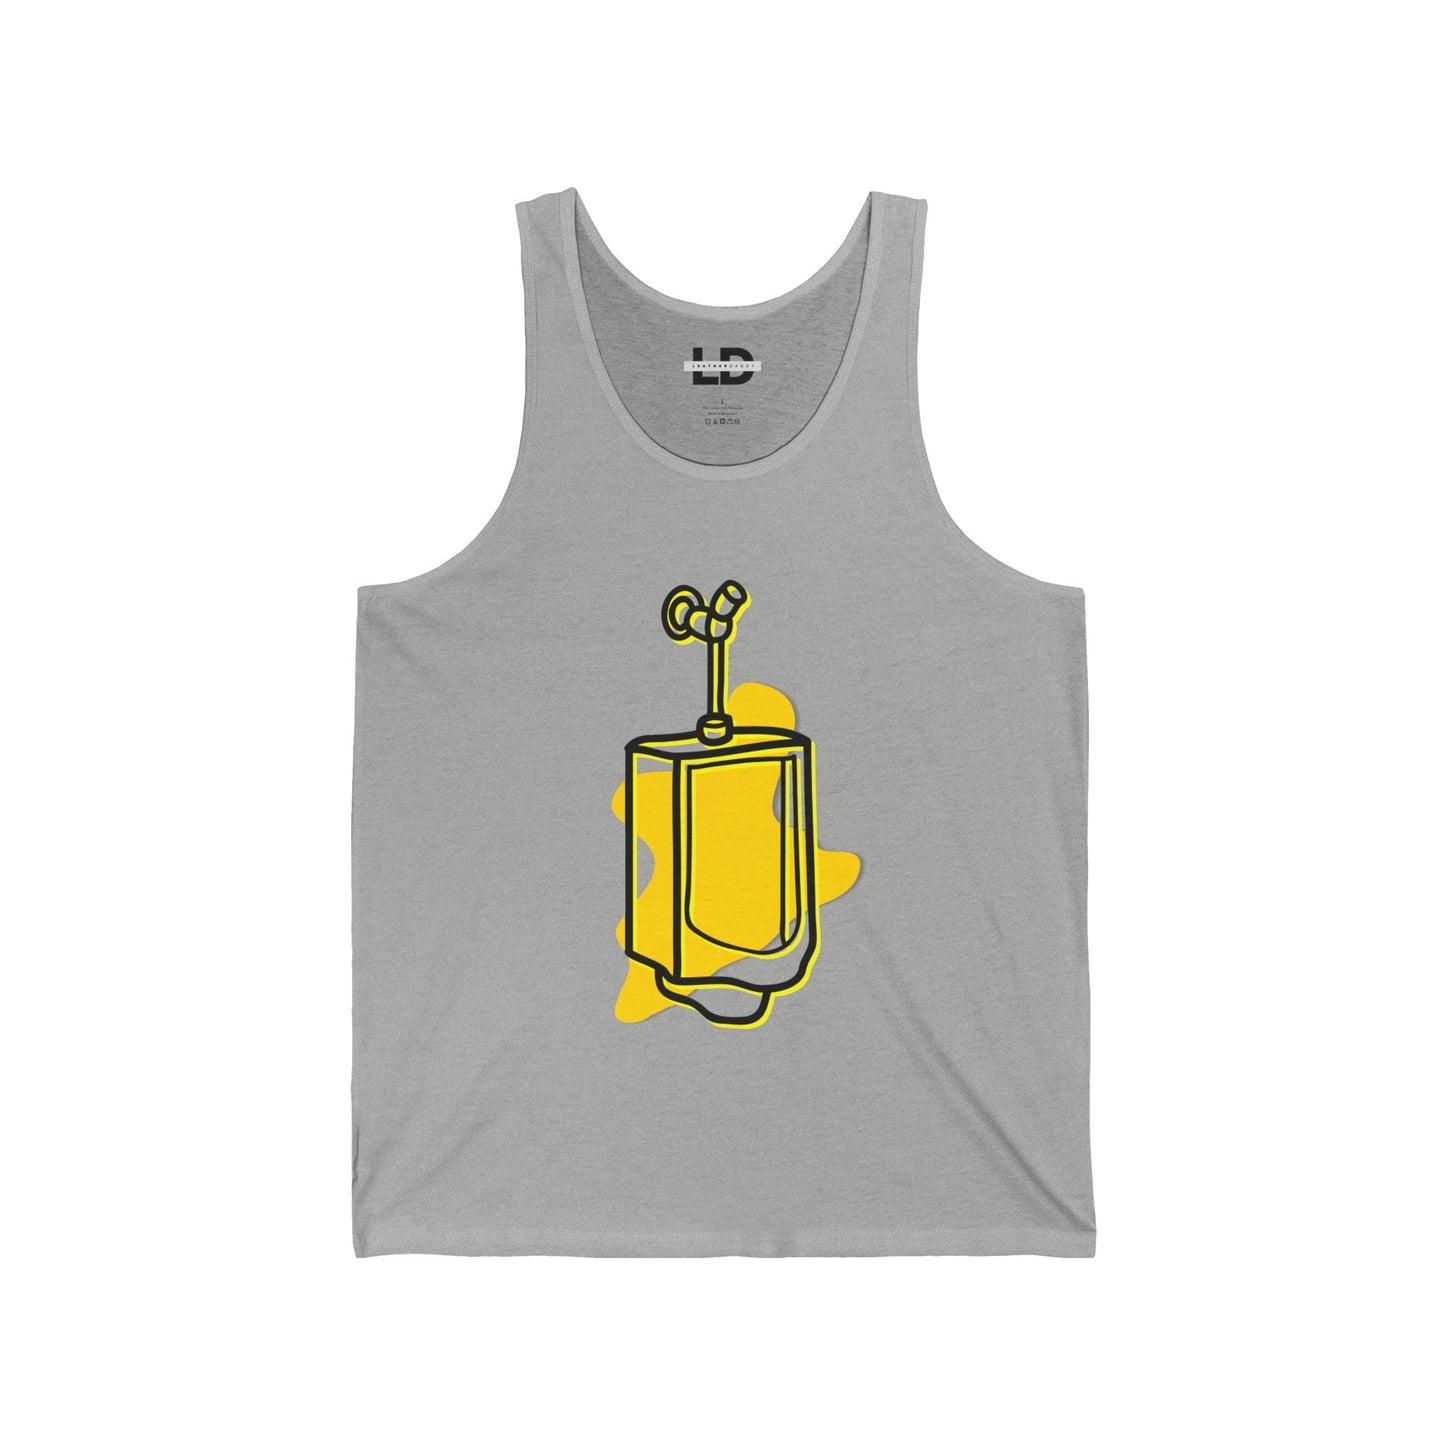 Tank Top XS / Athletic Heather Urine For A Treat Tank Top - LeatherDaddy LEATHERDADDY BATOR